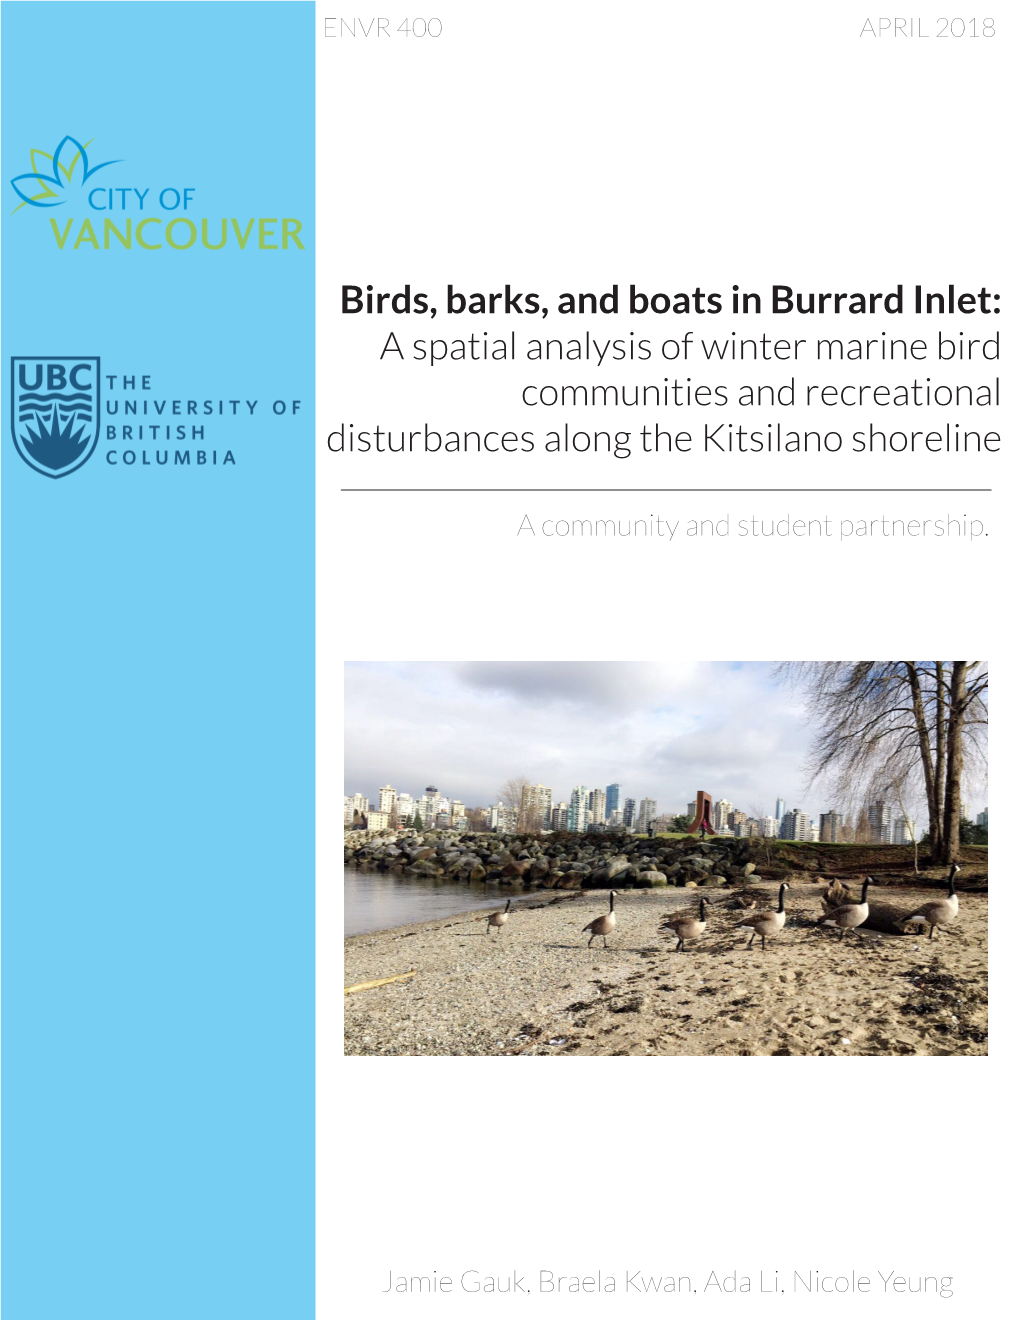 Birds, Barks, and Boats in Burrard Inlet: a Spatial Analysis of Winter Marine Bird Communities and Recreational Disturbances Along the Kitsilano Shoreline